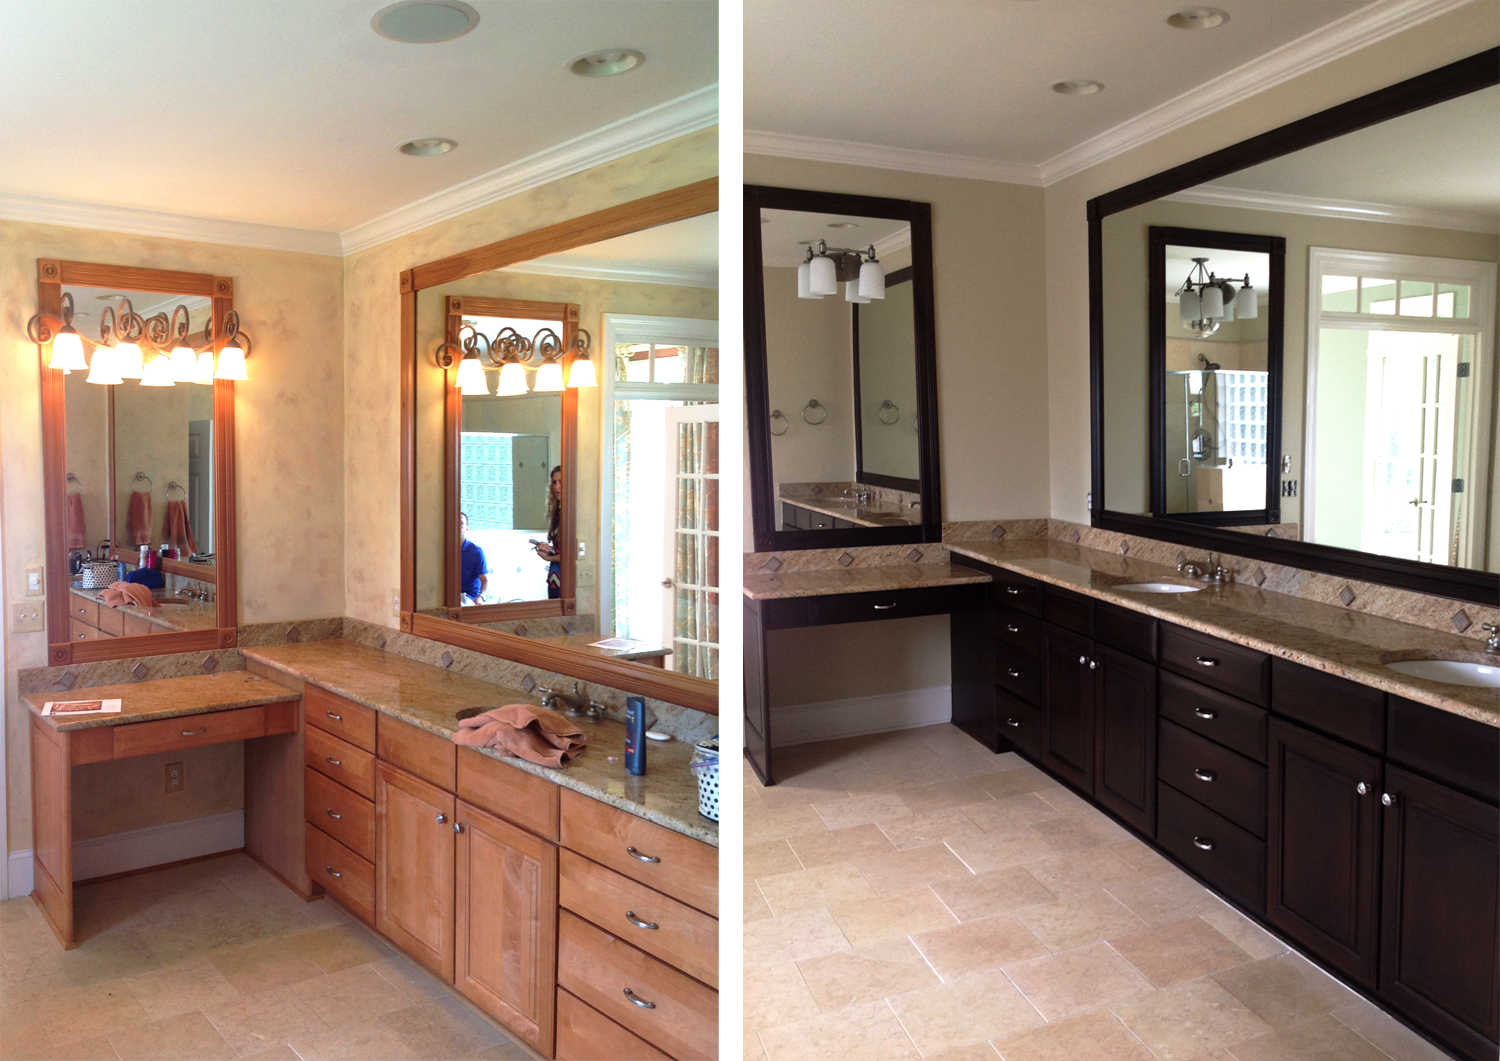 Before and After - Enjoy this Brentwood, TN client's master bathroom cabinet makeover in faux wood Mahogany glaze. Beautiful!